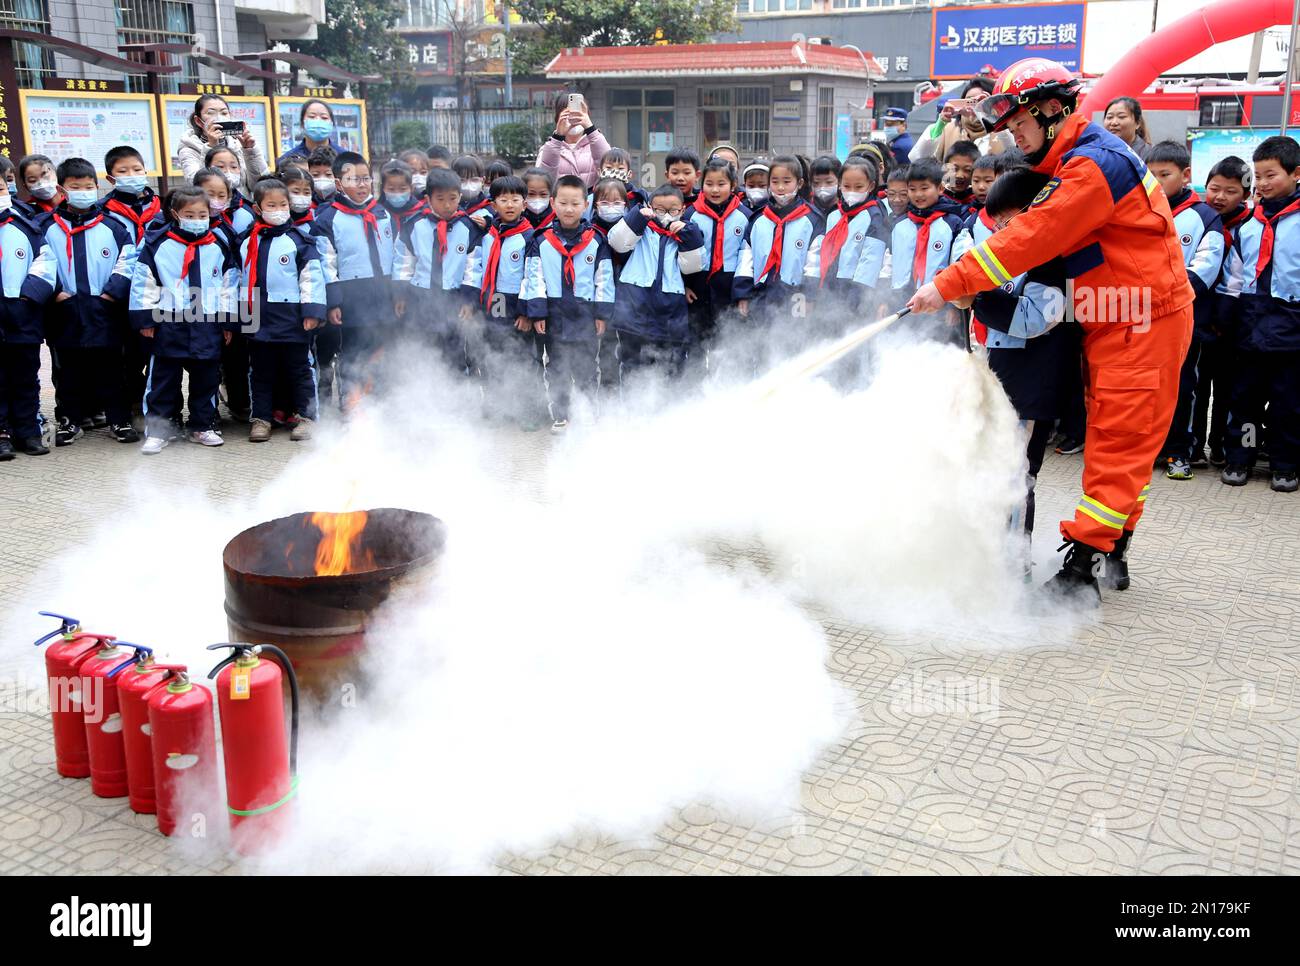 LIANYUNGANG, CHINA - FEBRUARY 6, 2023 - Fire rescue workers teach students how to use fire extinguishers in Lianyungang city, East China's Jiangsu pro Stock Photo